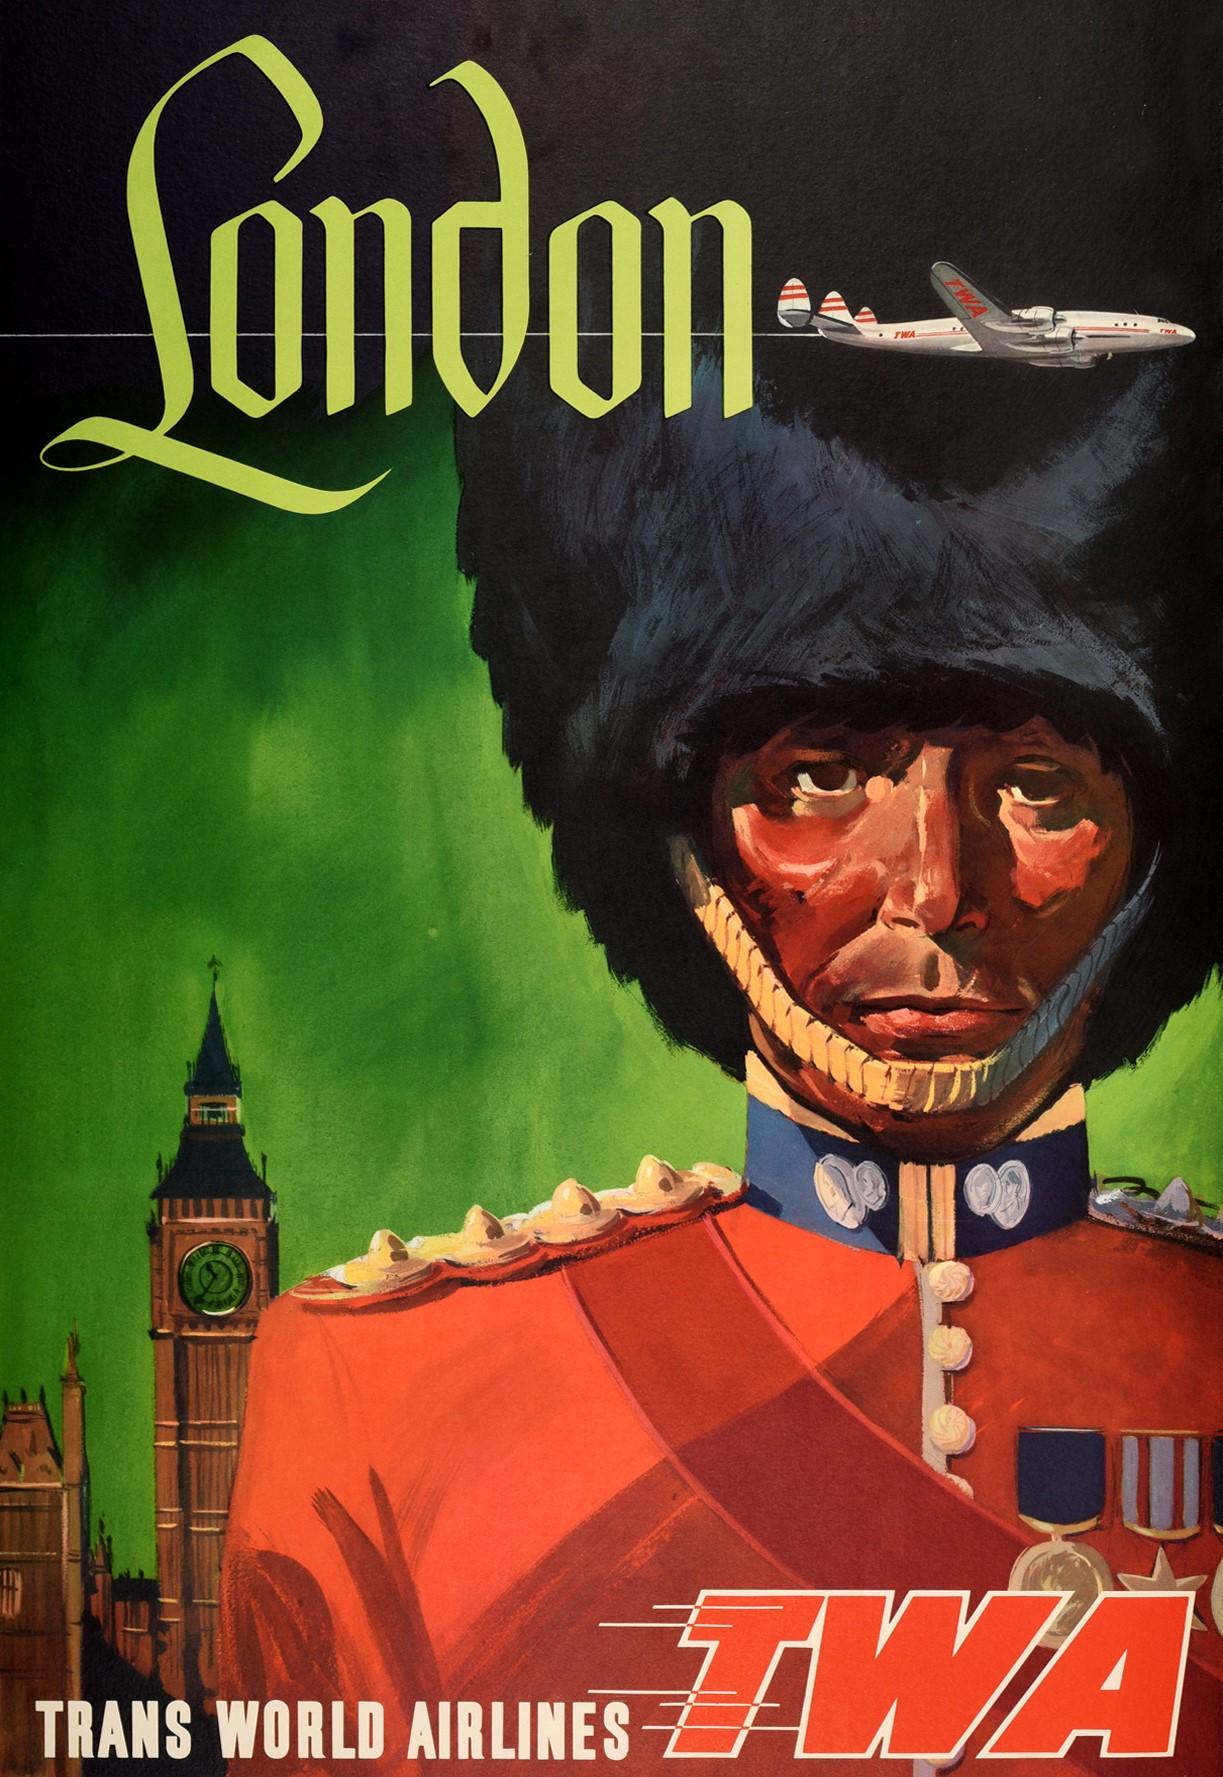 Original vintage travel poster for London issued by Trans World Airlines / TWA featuring a great design by the notable American artist David Klein (1918-2005) depicting a Royal Guard / Queen's Guard in red military uniform and bearskin hat standing